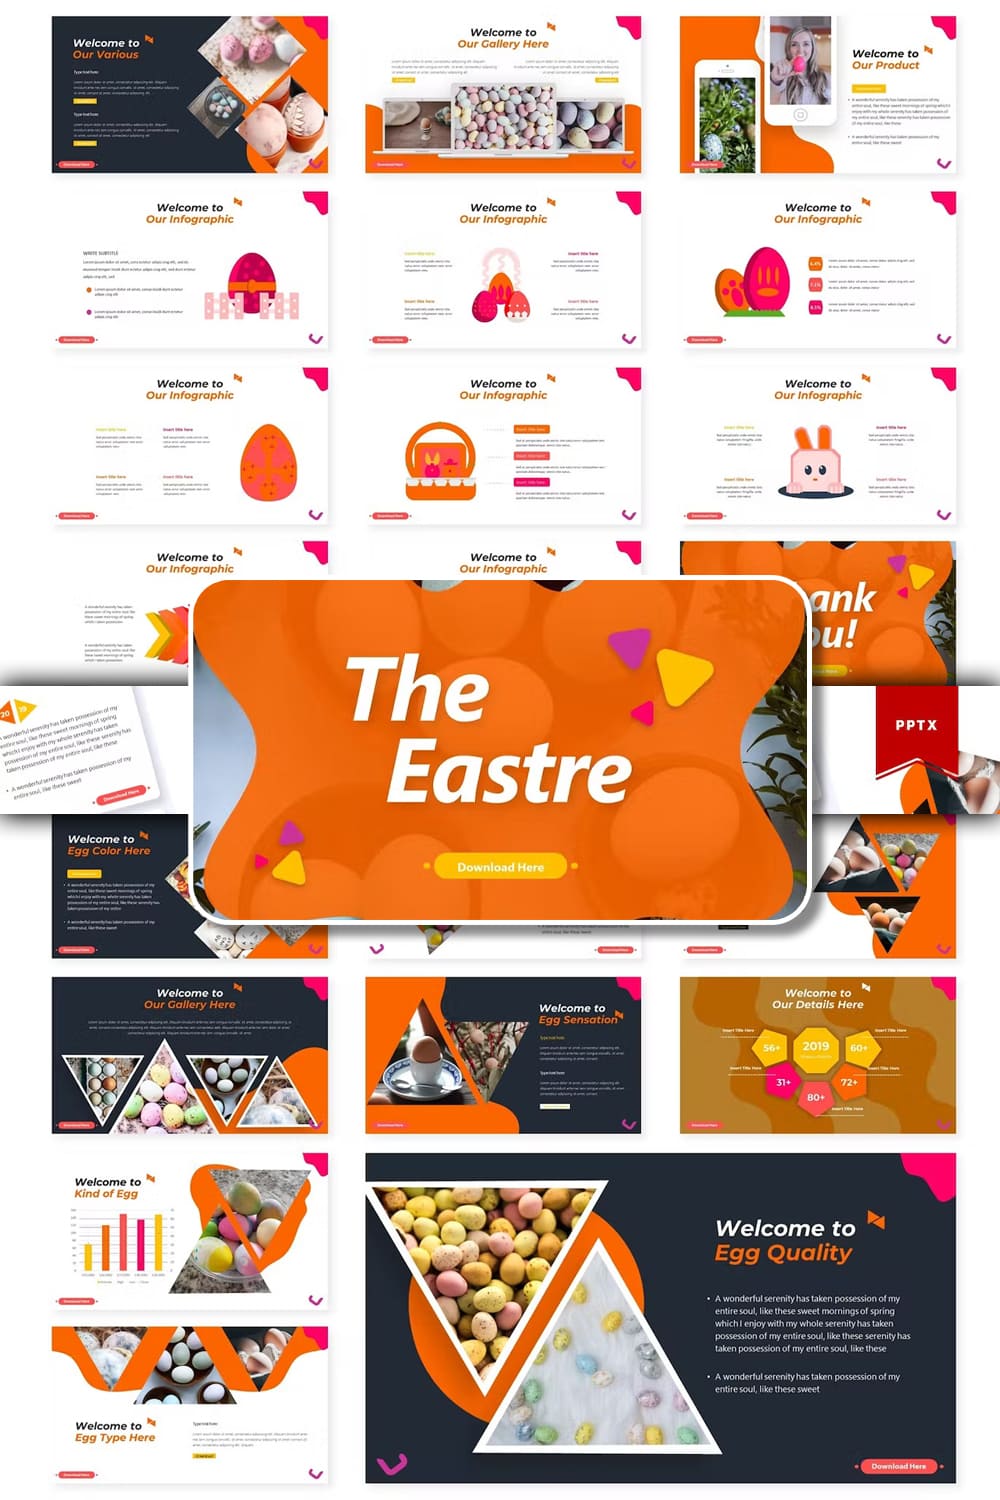 The eastre powerpoint template - pinterest image preview.